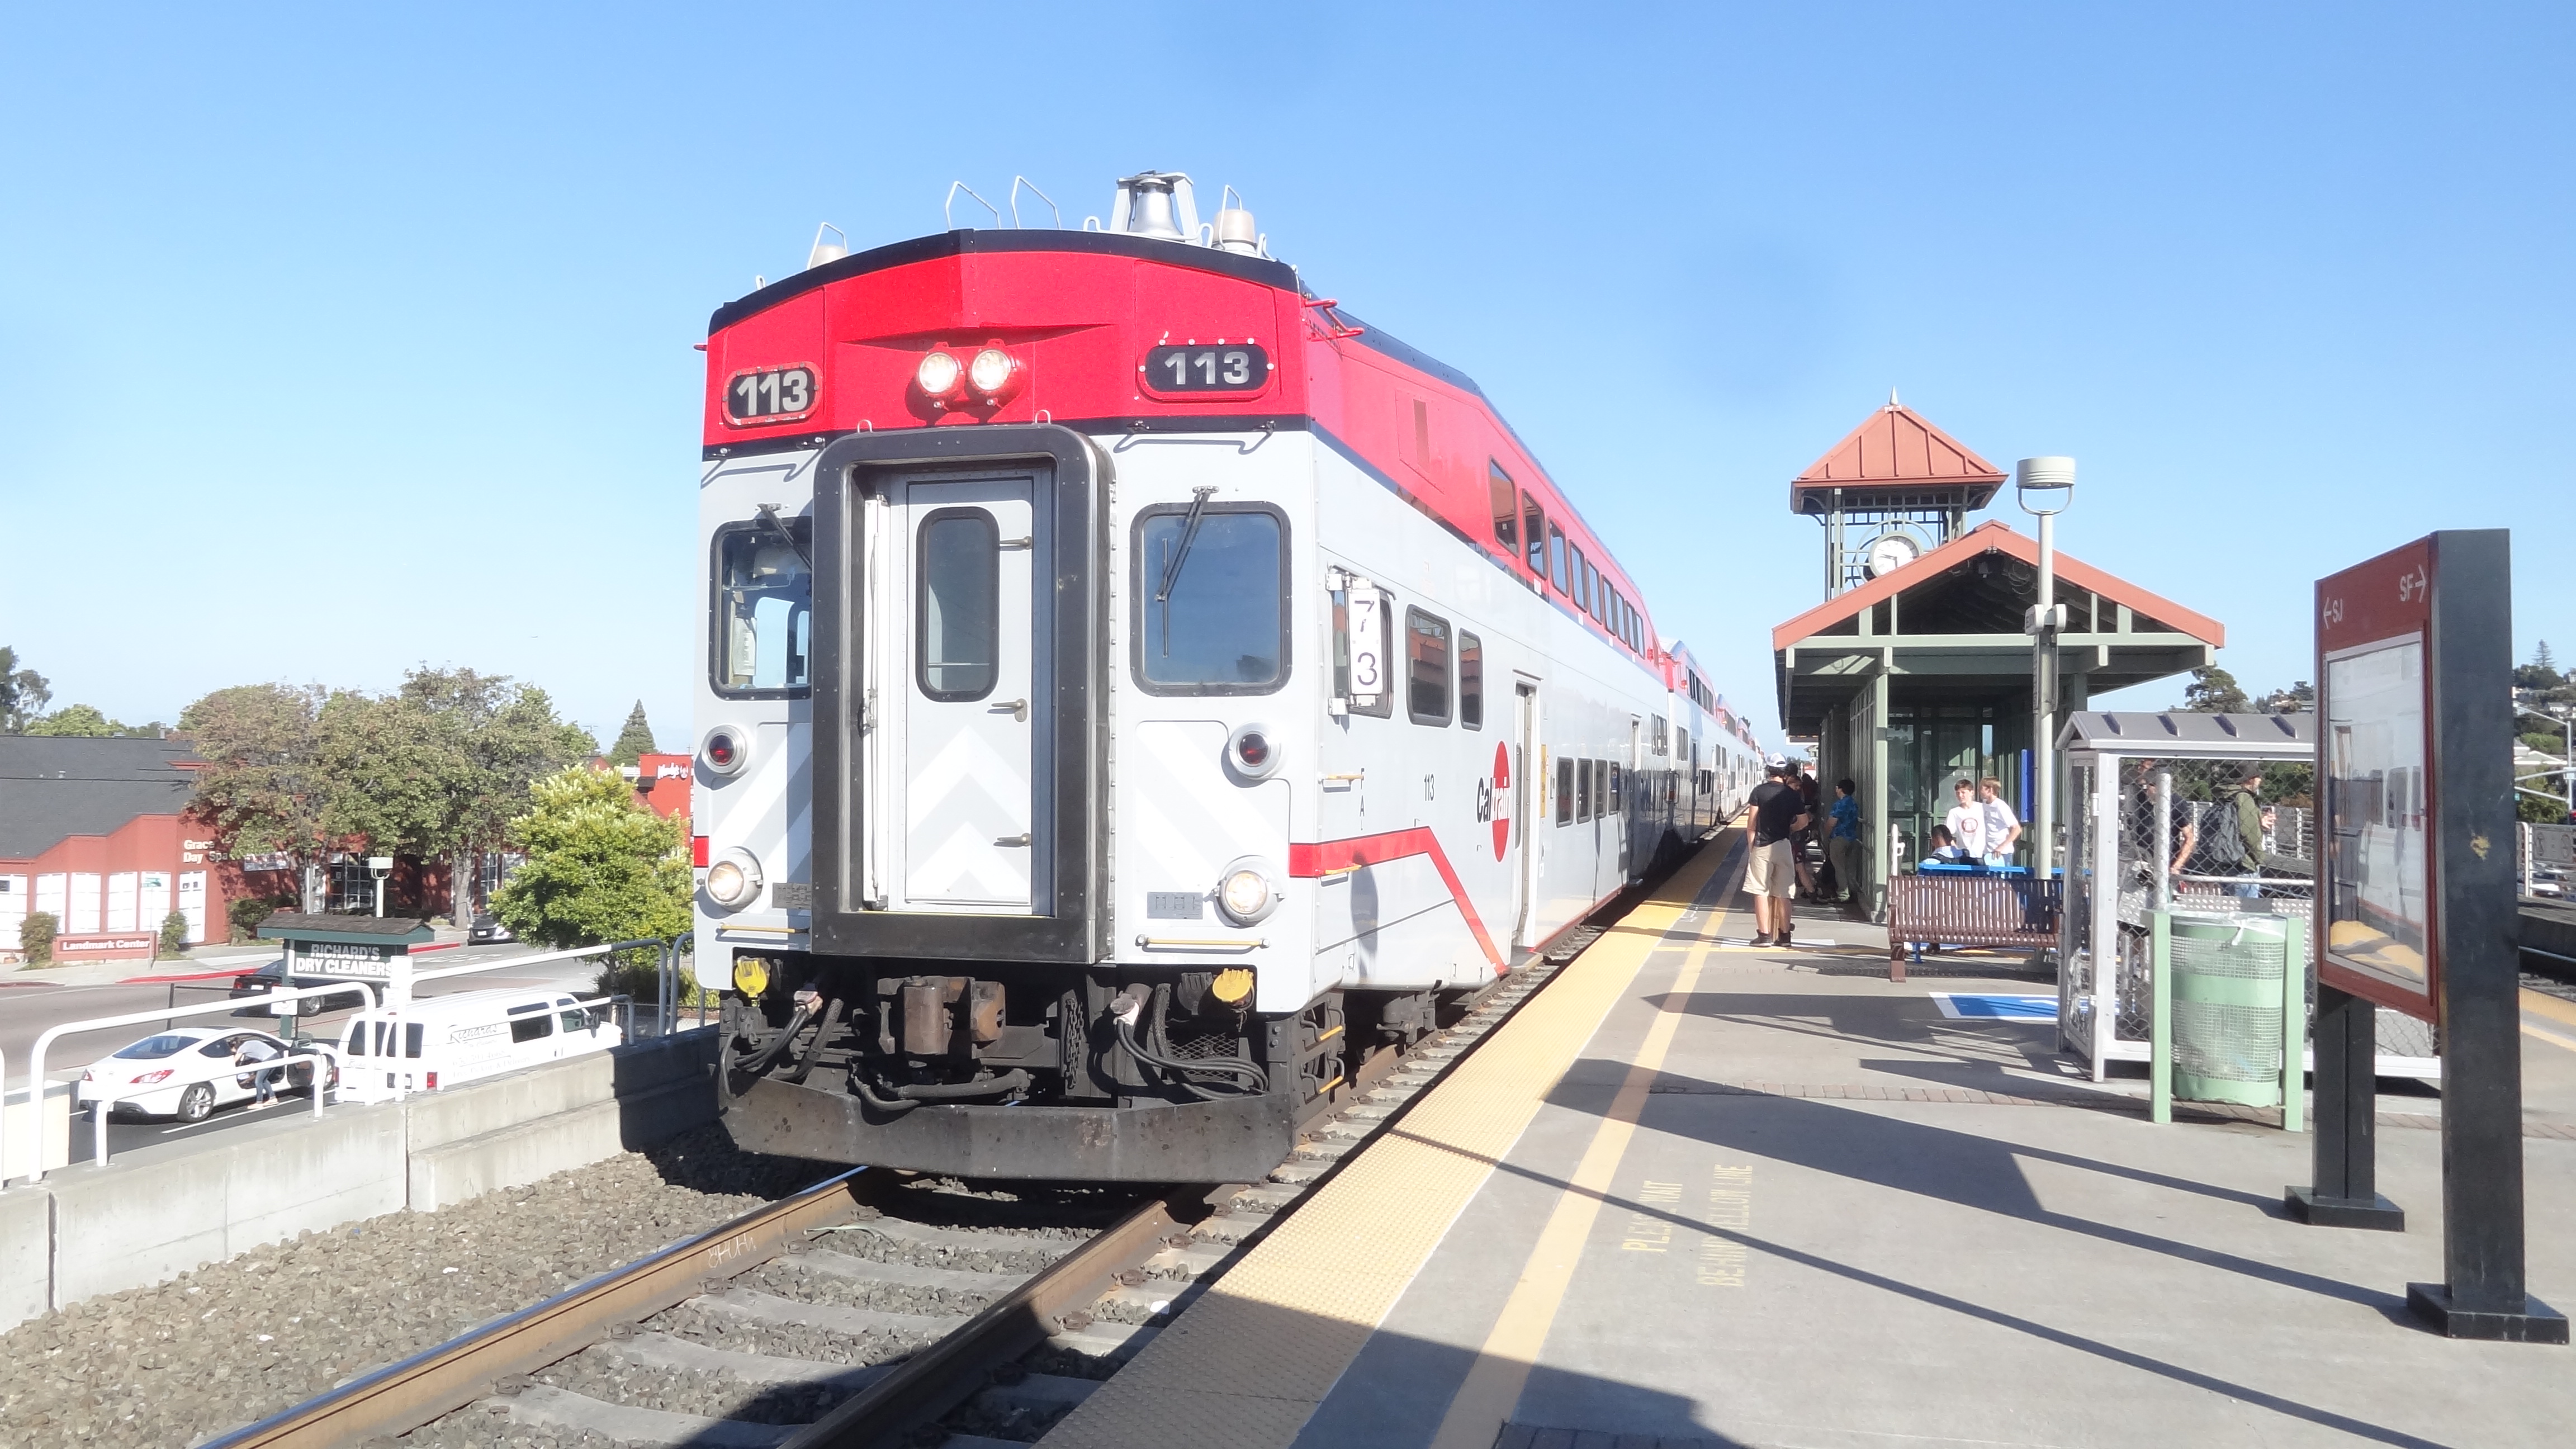 Bombardier Bilevel cab car unit 113 leading a northbound train to San Francisco at Belmont Station